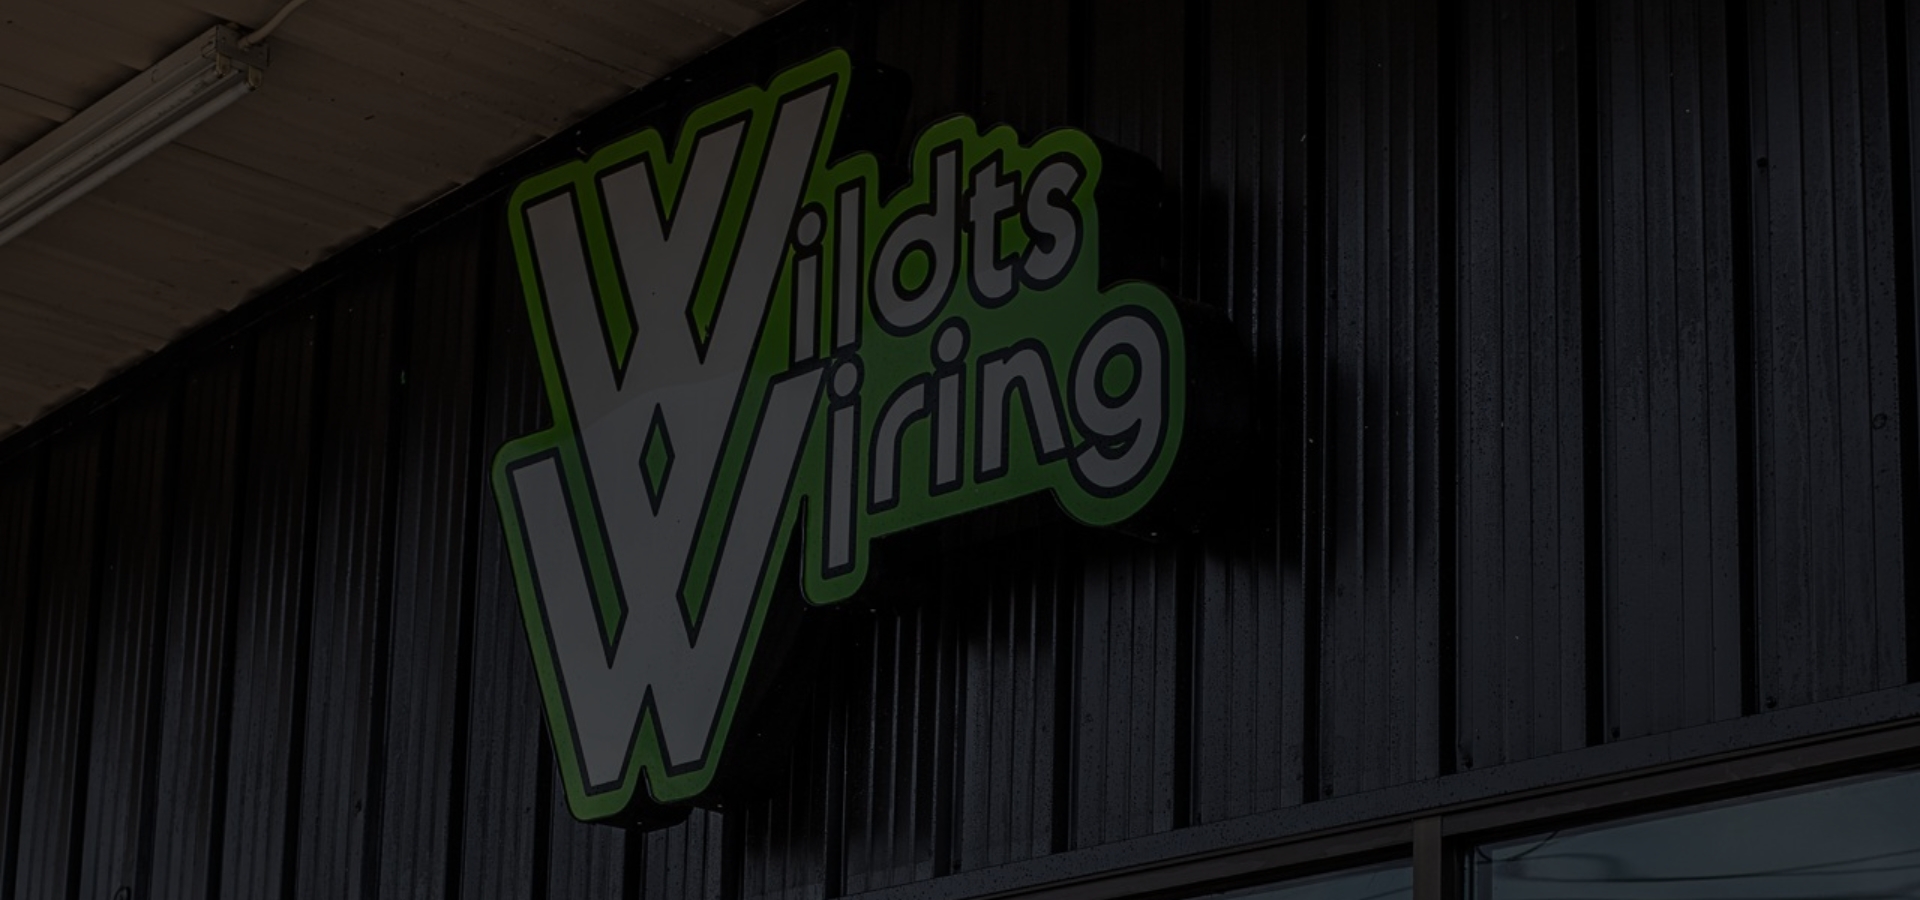 Wildts Wiring is looking to hire experienced and knowledgable electricians!